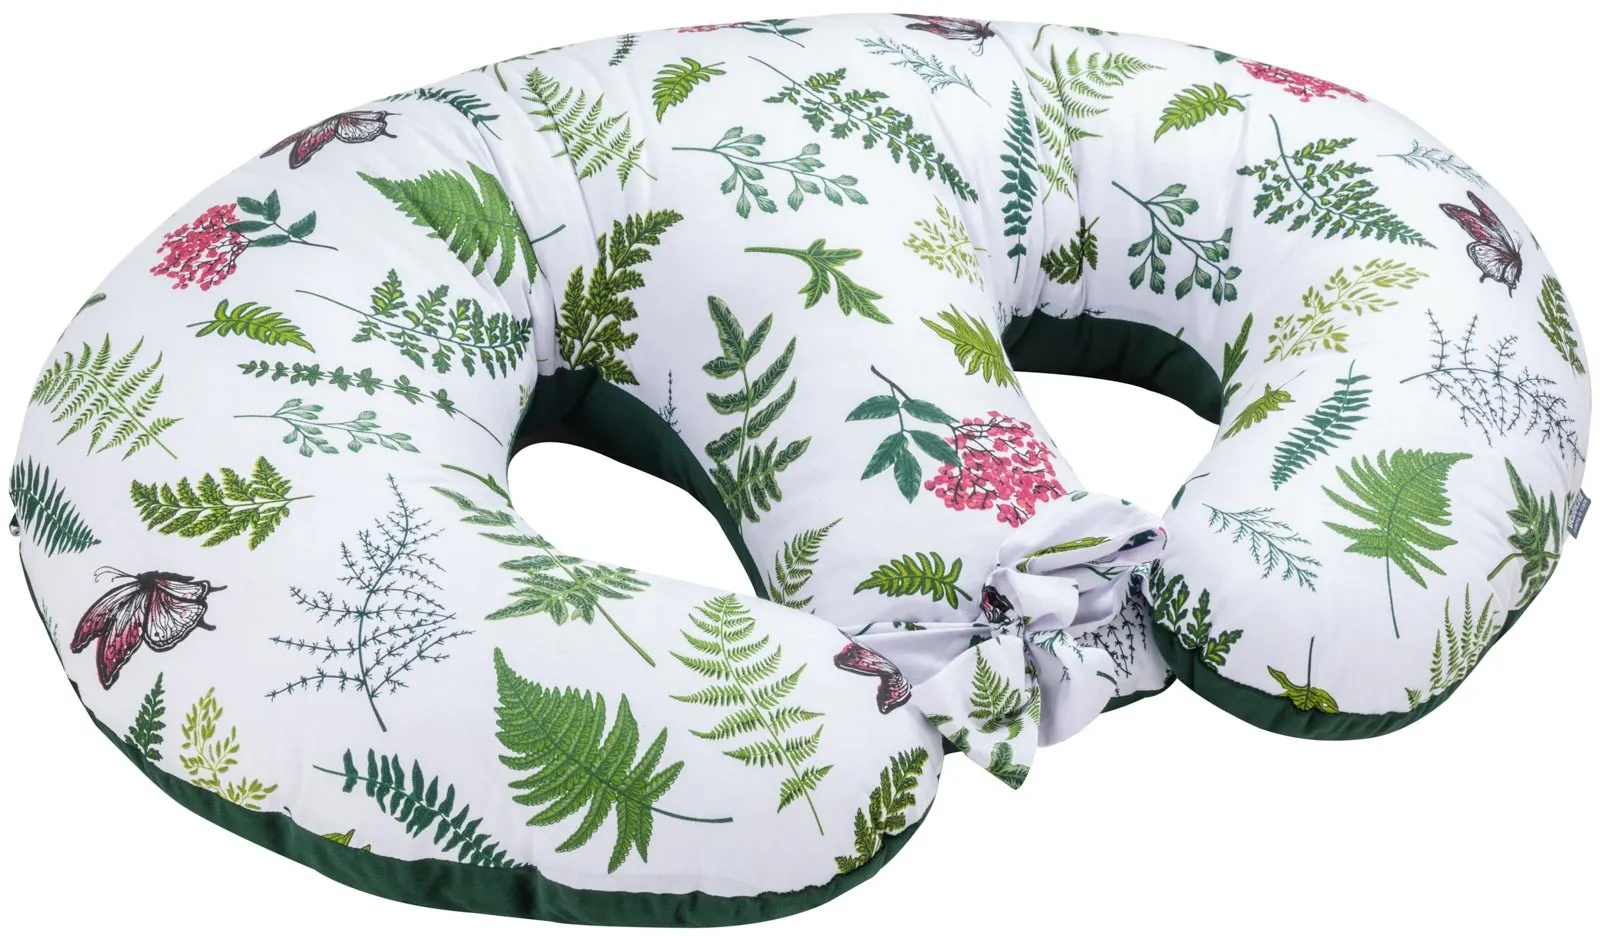 Large double twin pillow 100×57 cm nature